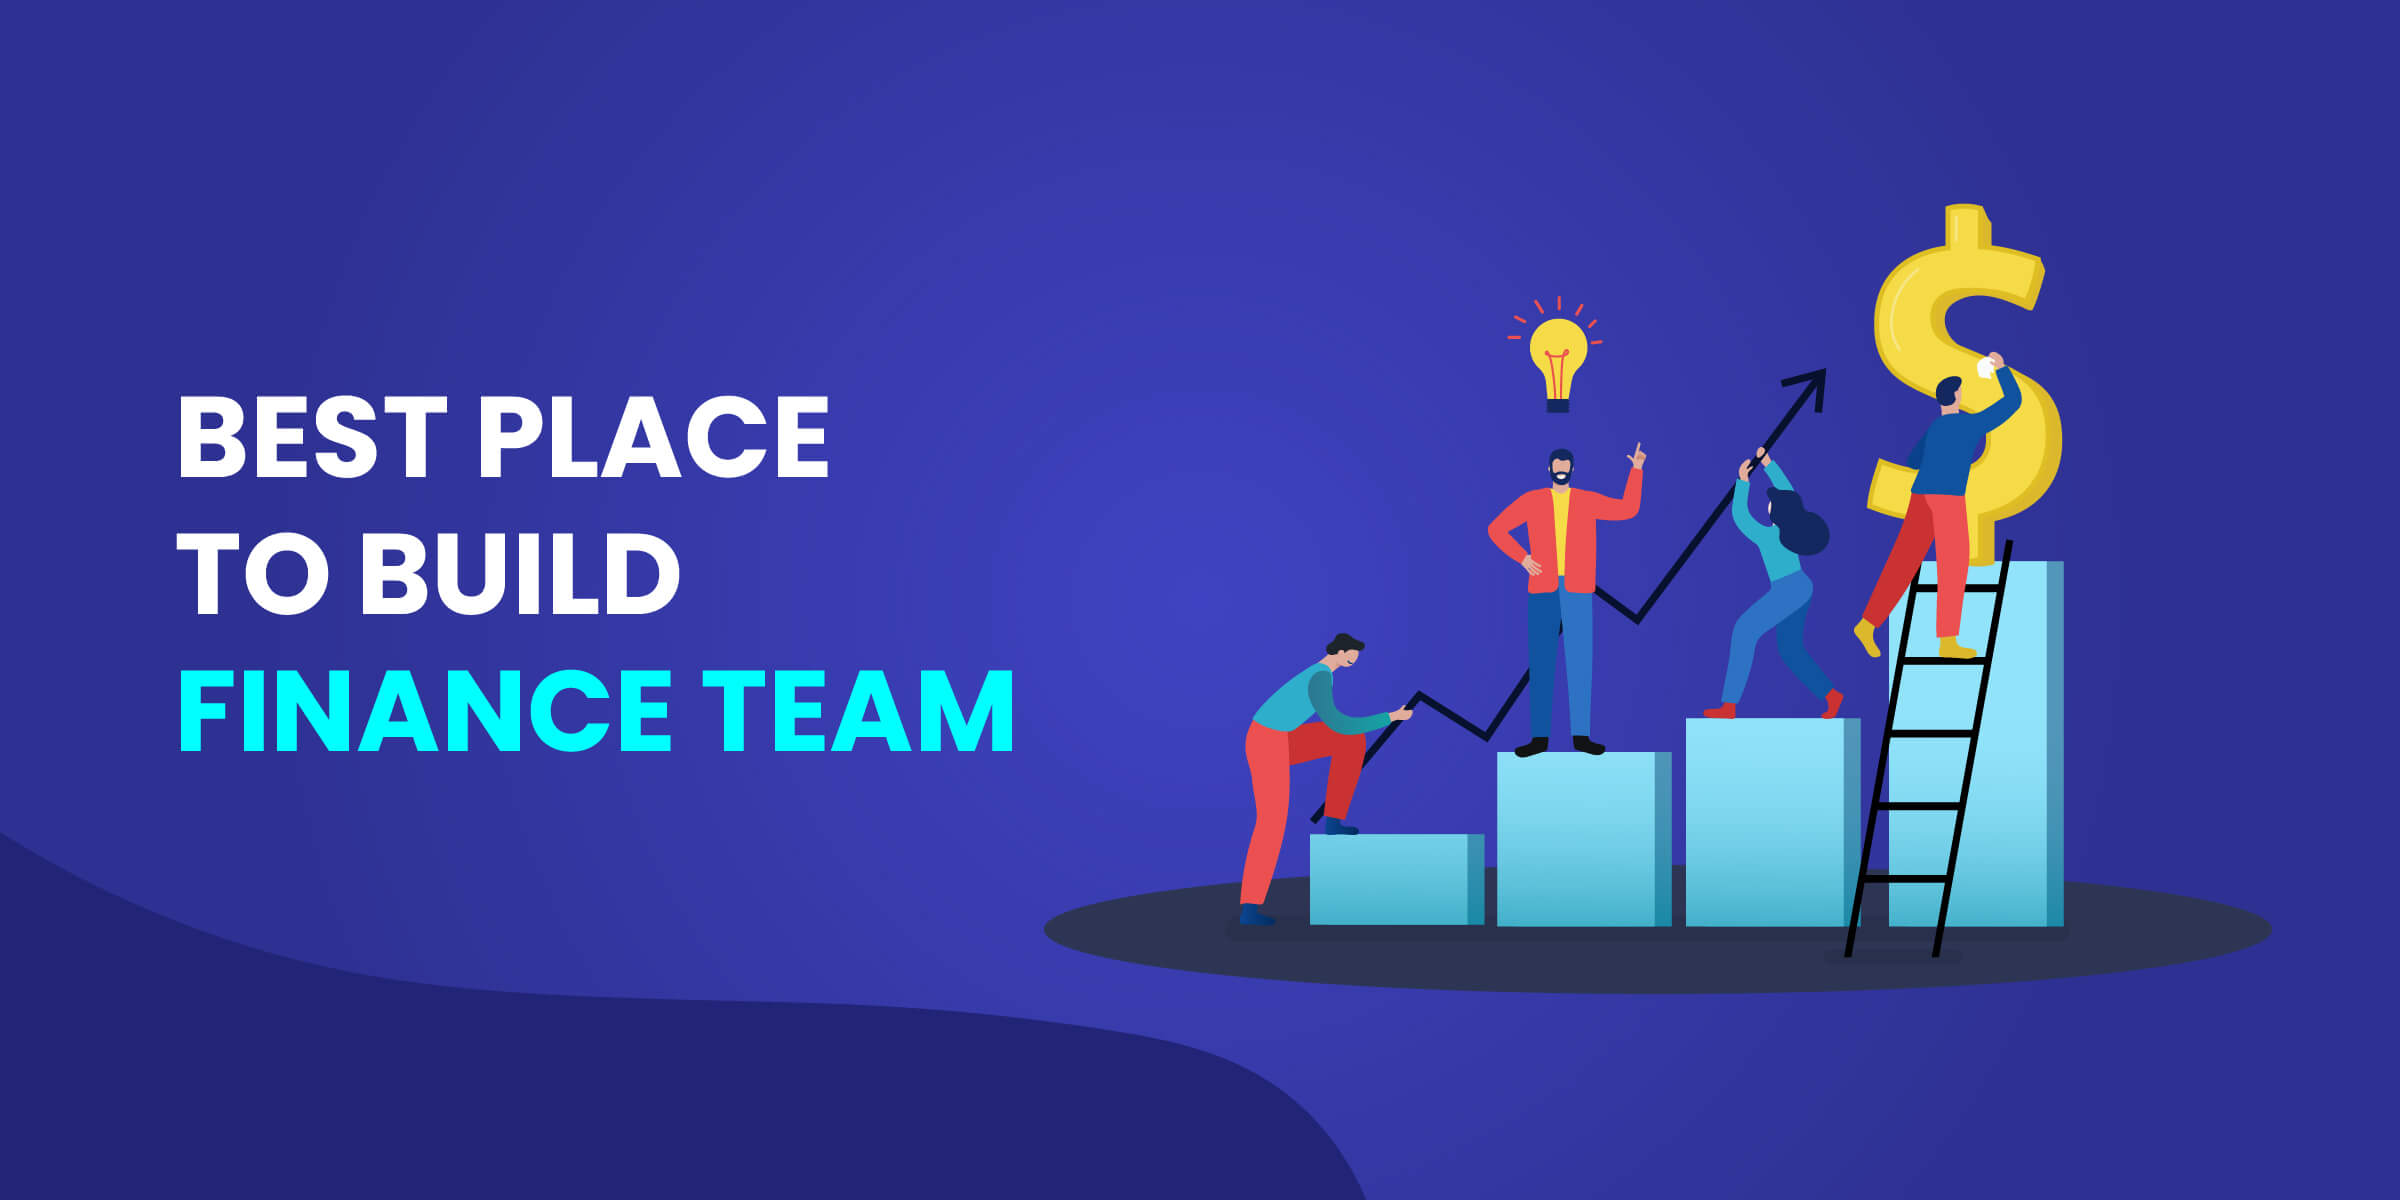 Best Place to Build Finance Team